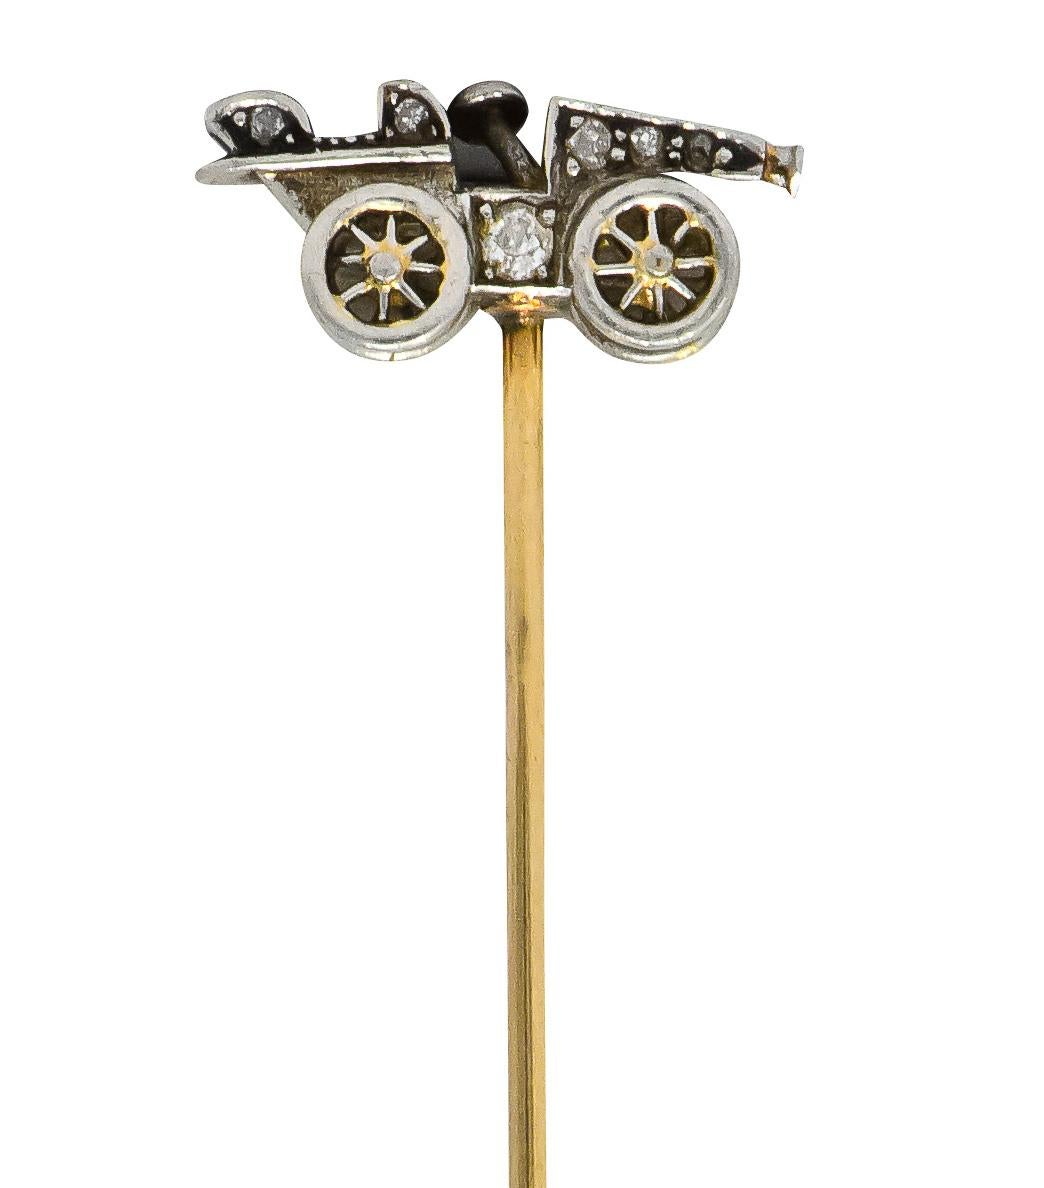 Designed as an antique car

Accented with old European, Swiss and single cut diamonds, total diamond weight approximately 0.10 carat, eye-clean and white

Tested as Platinum with gold pin stem

Car Measures: Approx. 3/4 x 1/4 Inch

Total Length:2